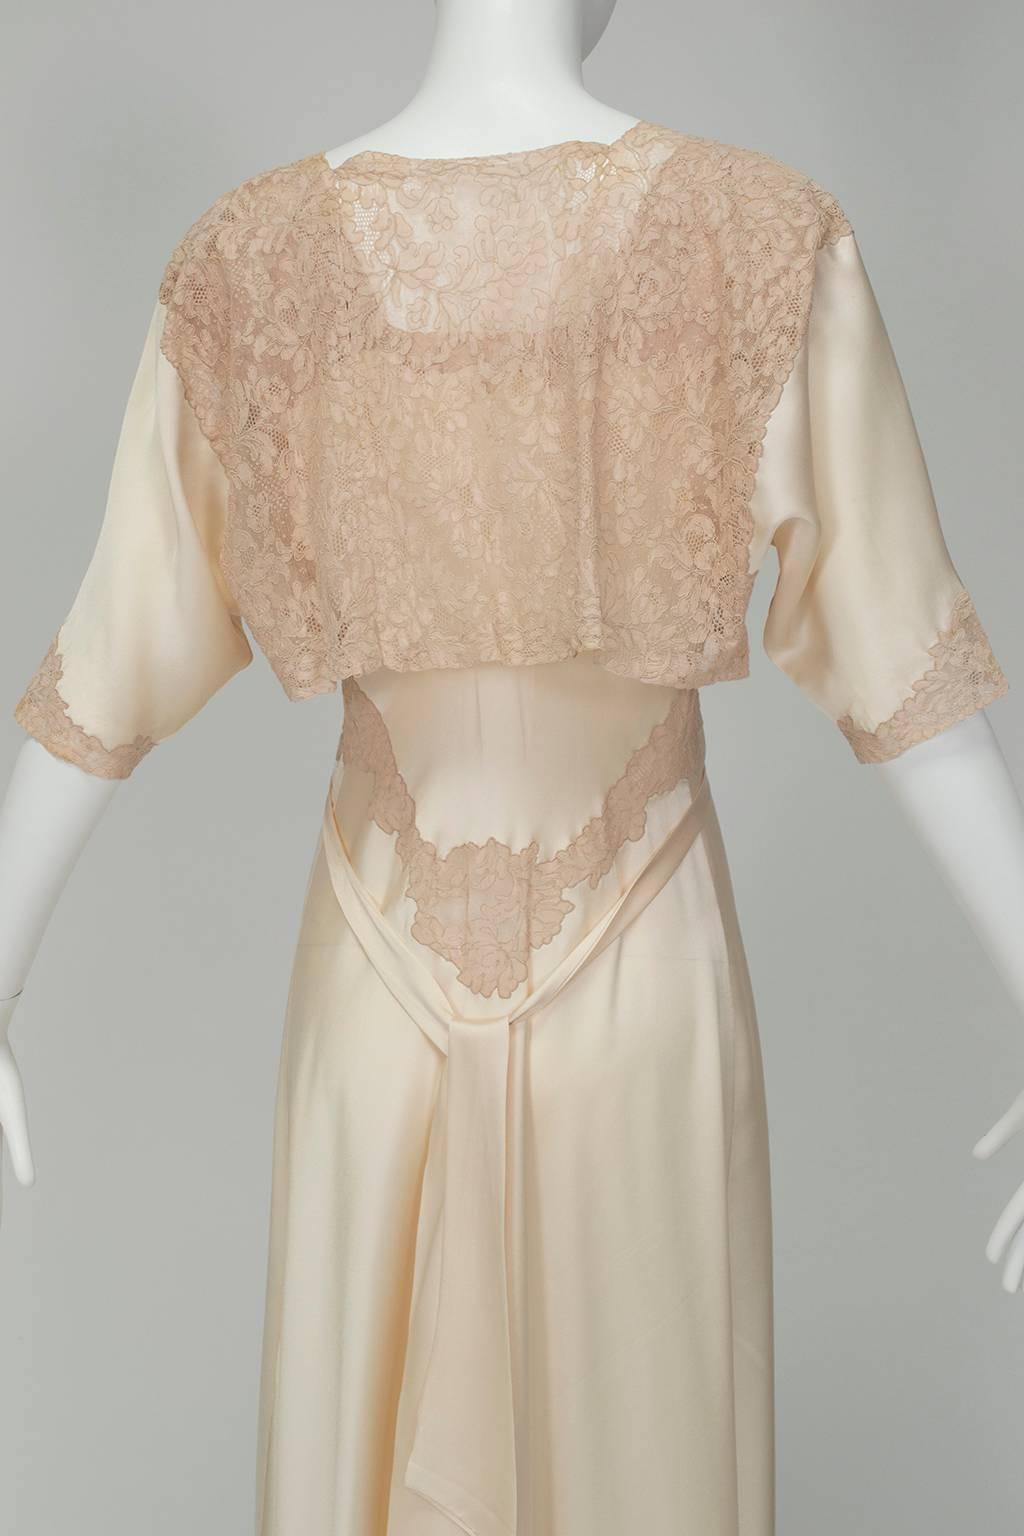 Beige Nude Hollywood Regency Charmeuse and Lace Peignoir Dressing Gown - Medium, 1930s